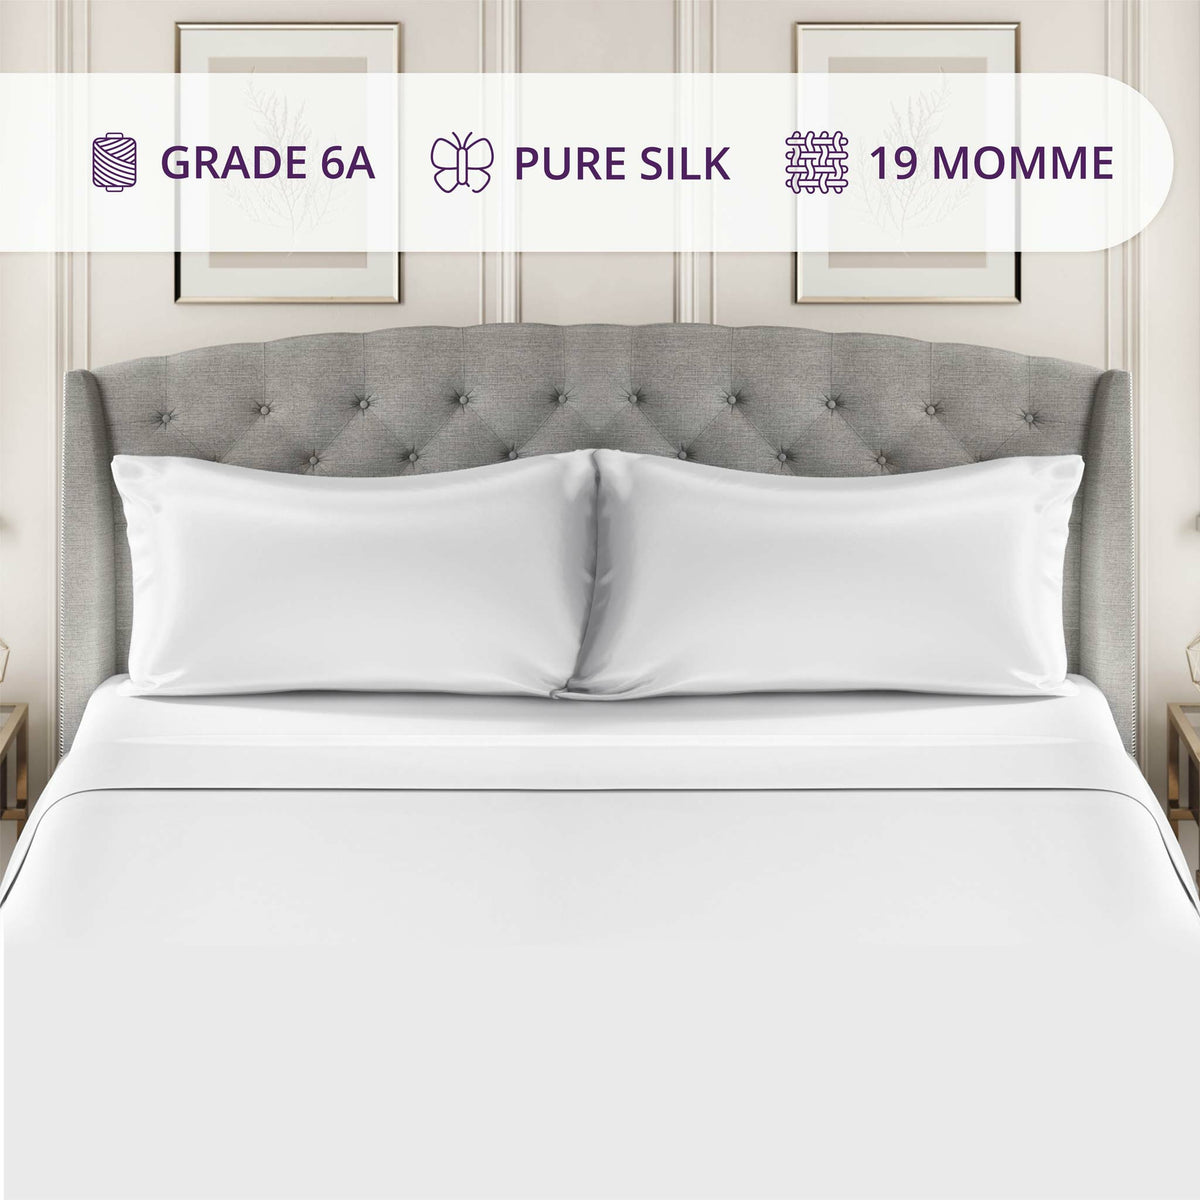 Silk Sheet Set Features 19 Momme White Fine Linens